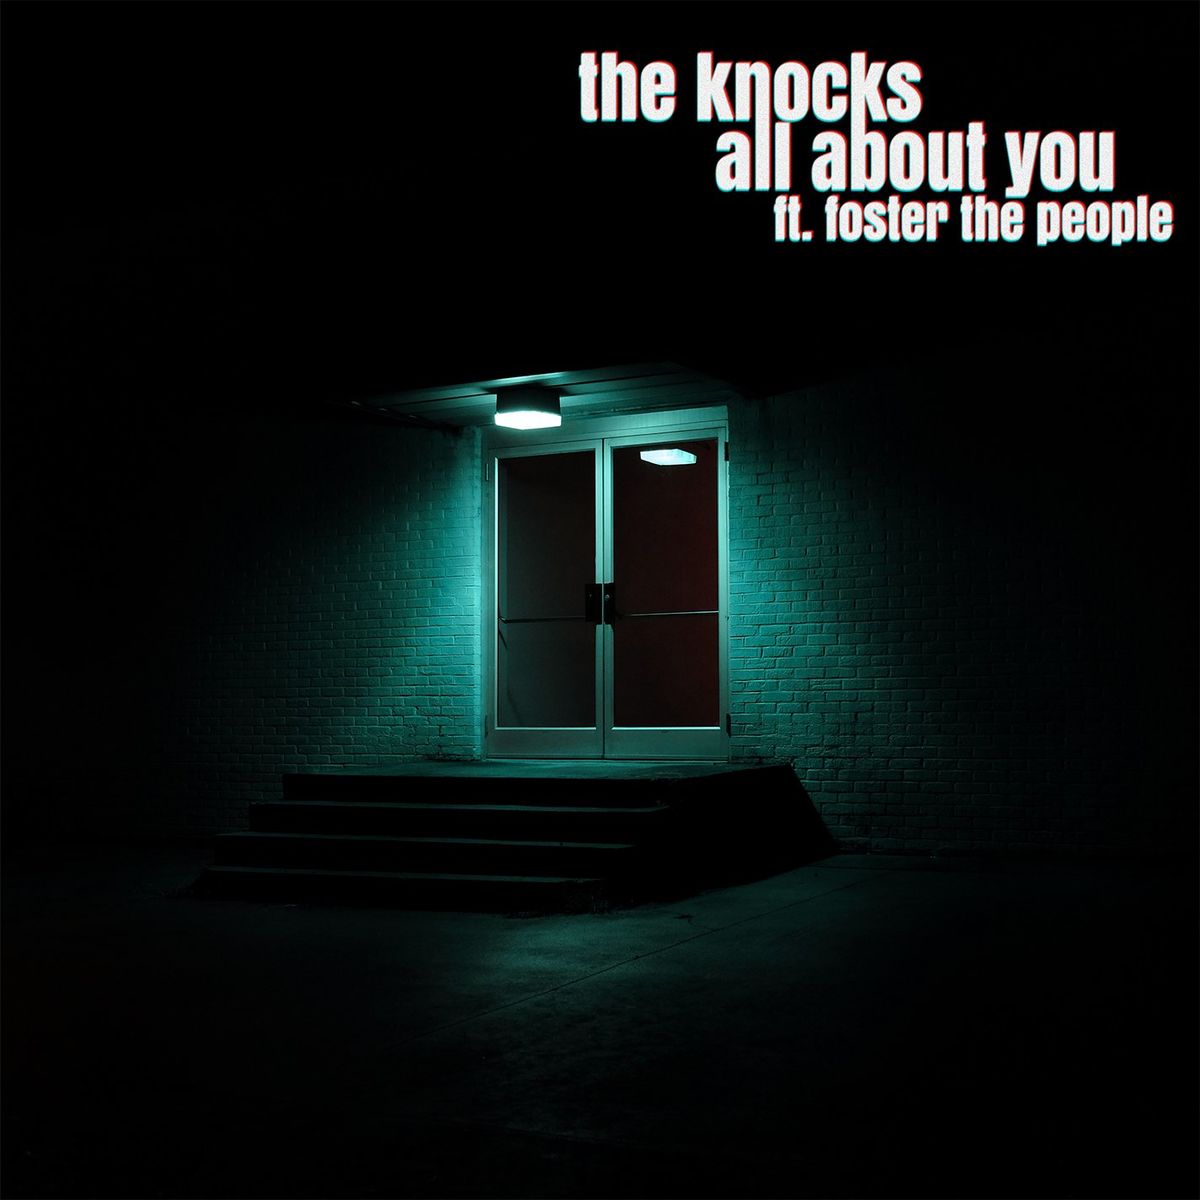 The Knocks ft Foster The People - All About You